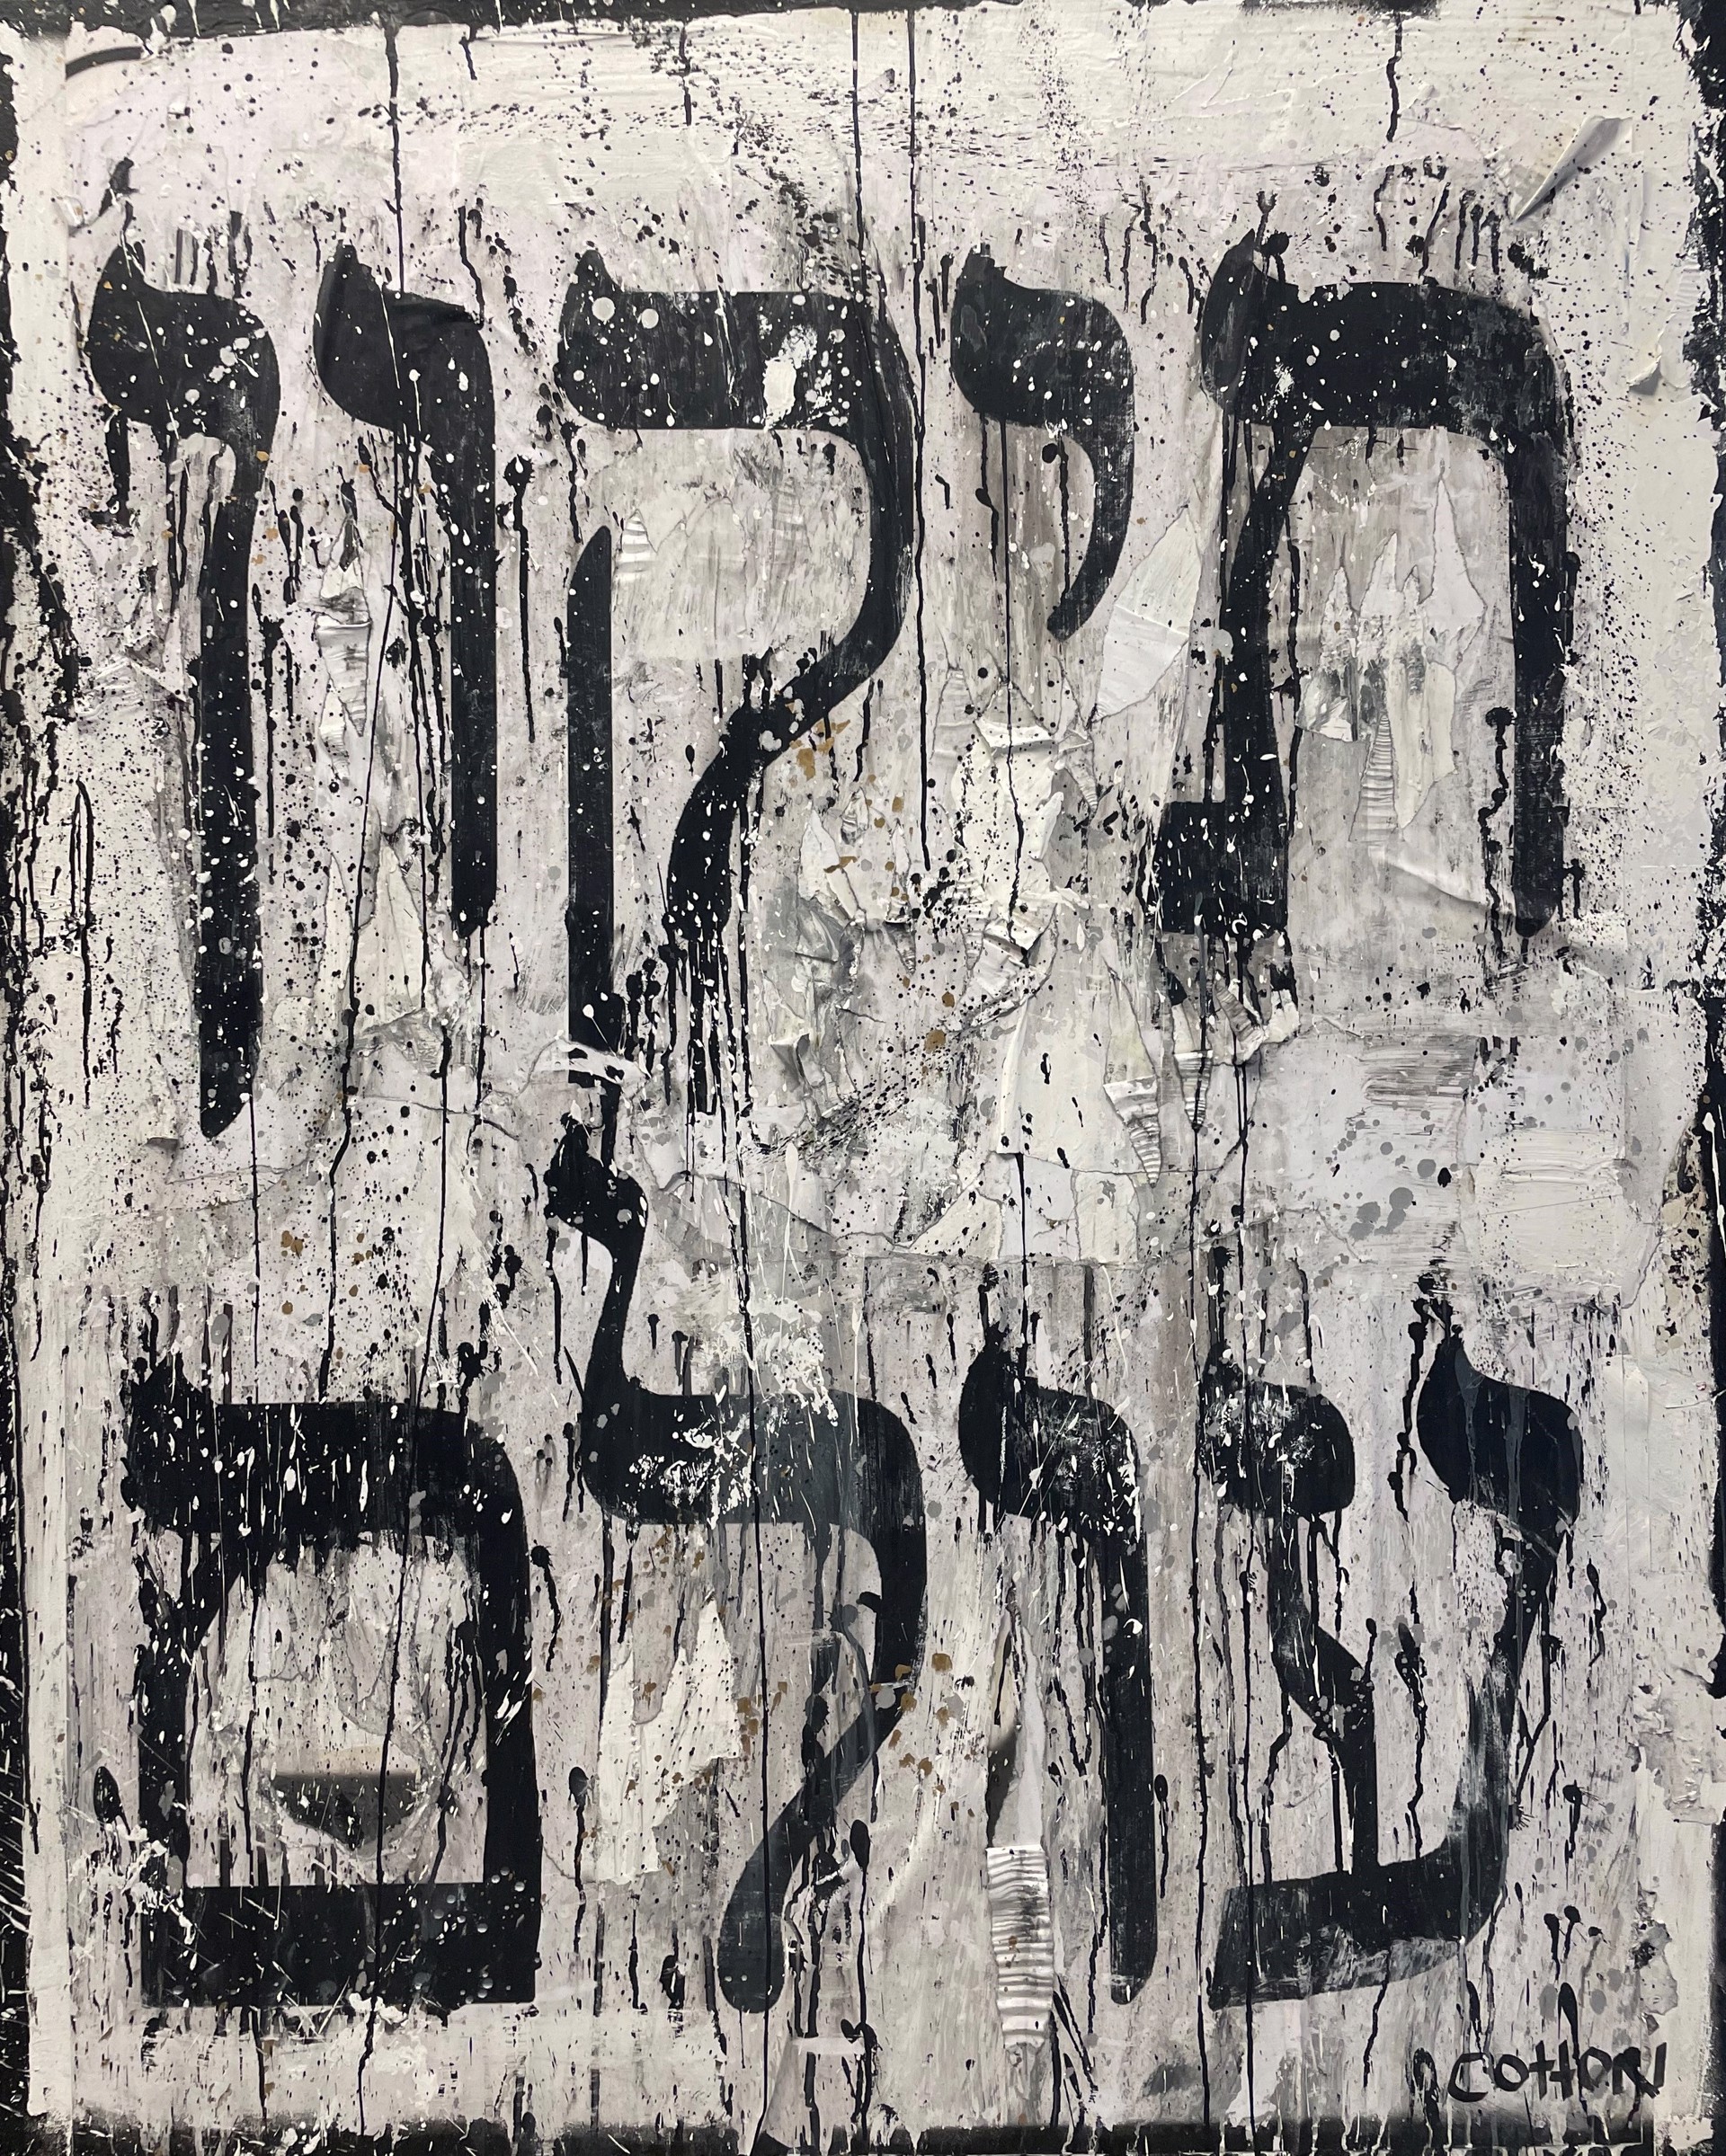 Judaic - "Repair the Worlds" by Andrew Cotton